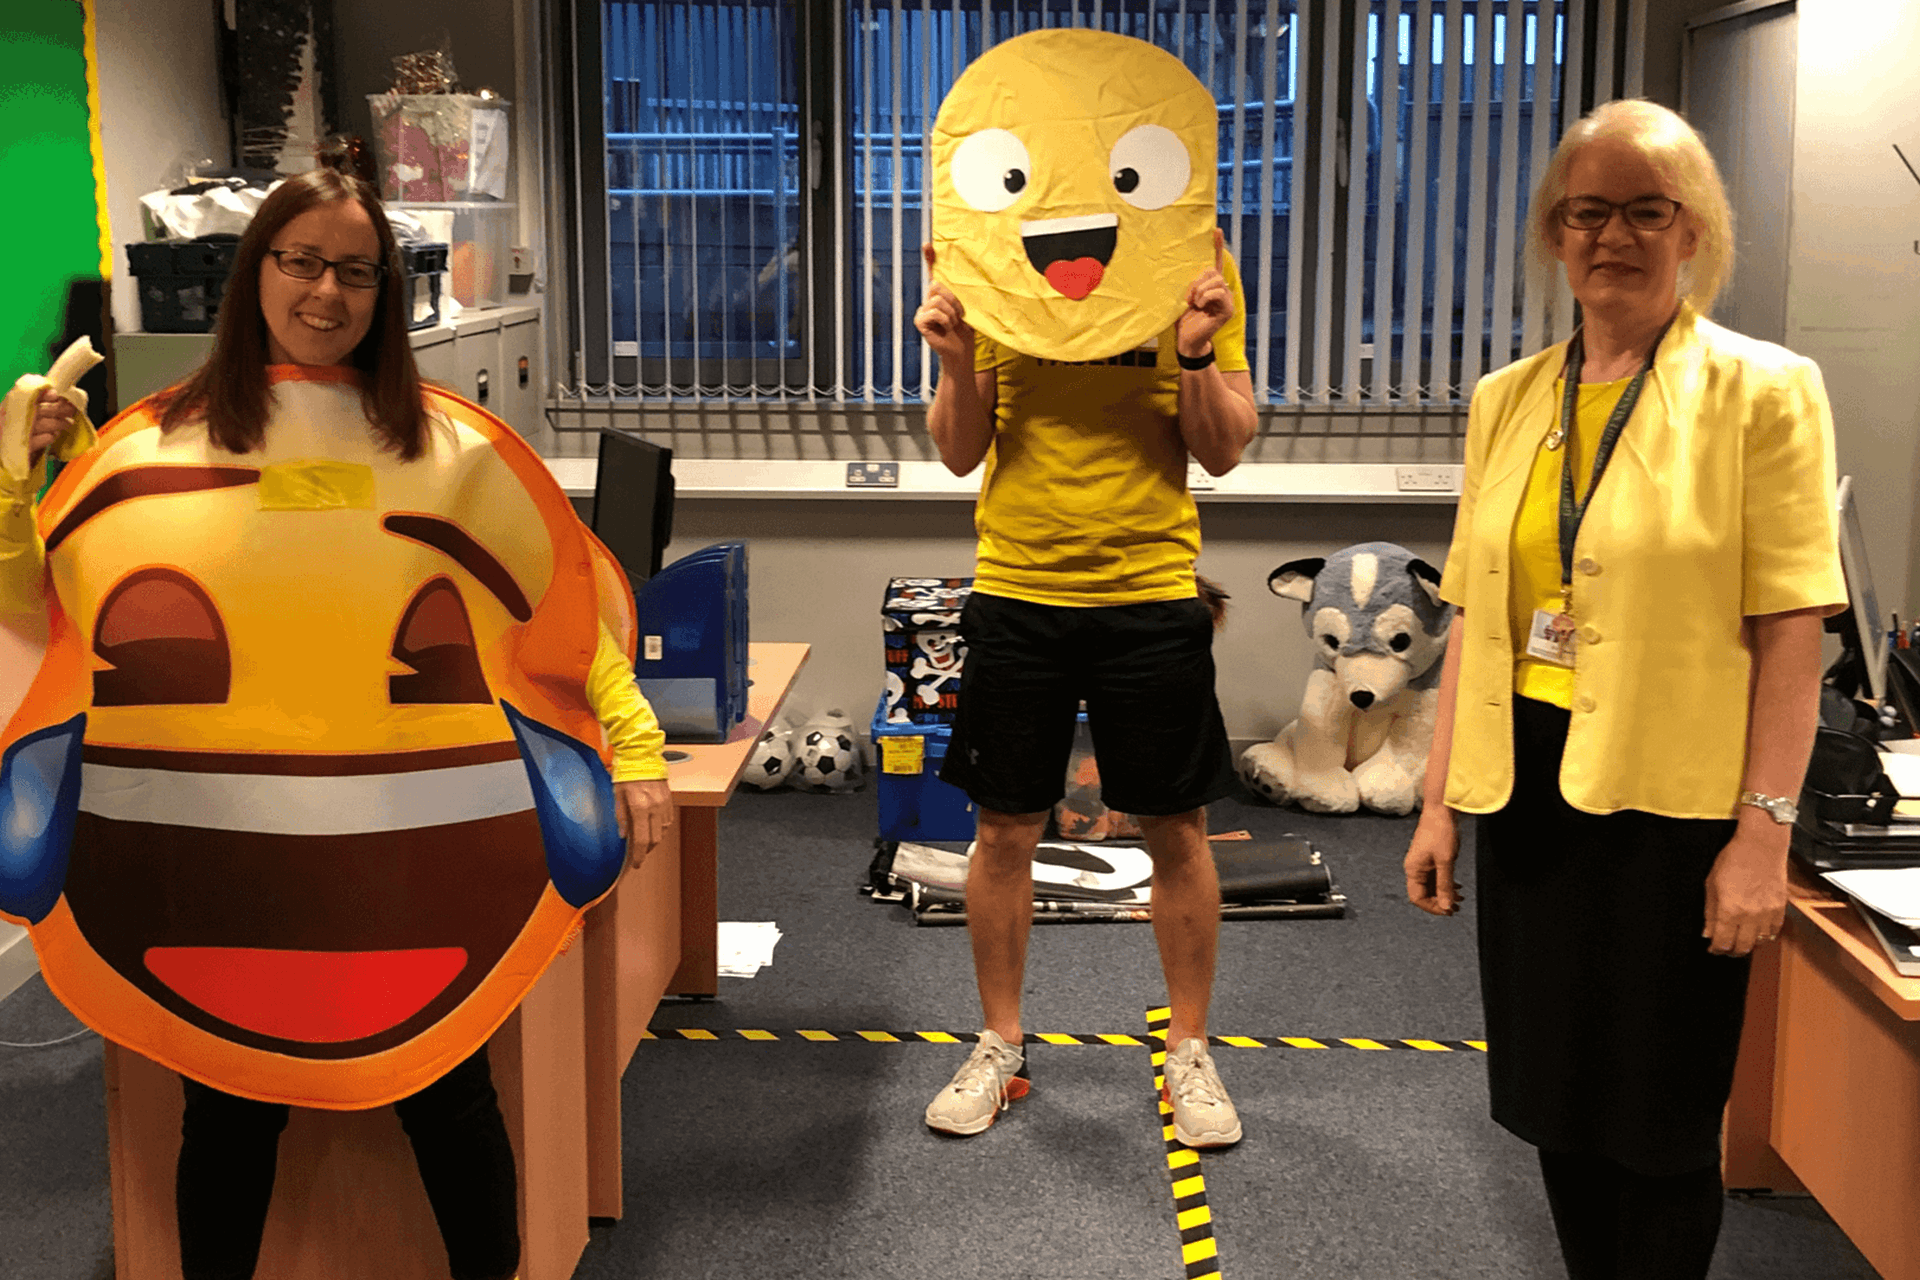 Three people stand in a group wearing yellow, the person on the left is wearing a yellow laughing emoji, the person in the middle holds a yellow smiley face and the person on the right is wearing a yellow top and cardigan